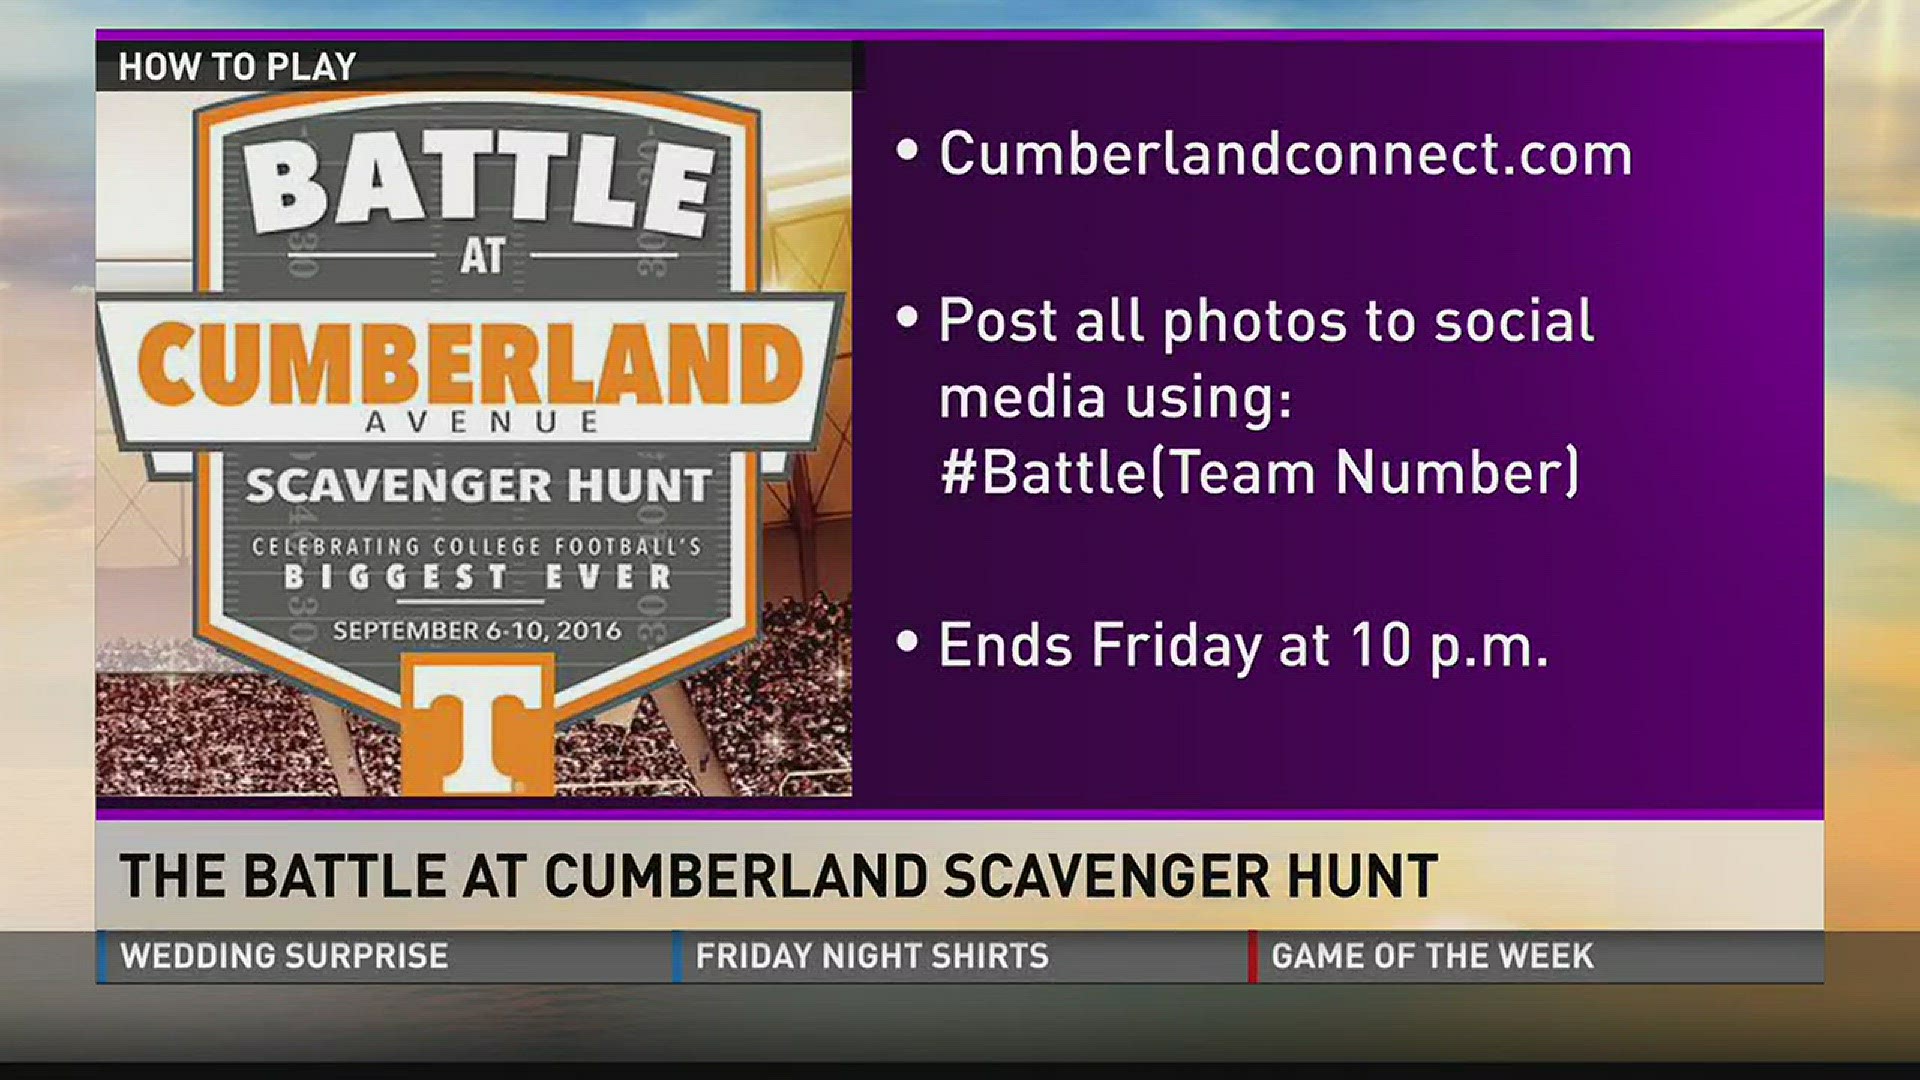 The Battle at Cumberland Avenue Scavenger Hunt started Tuesday.